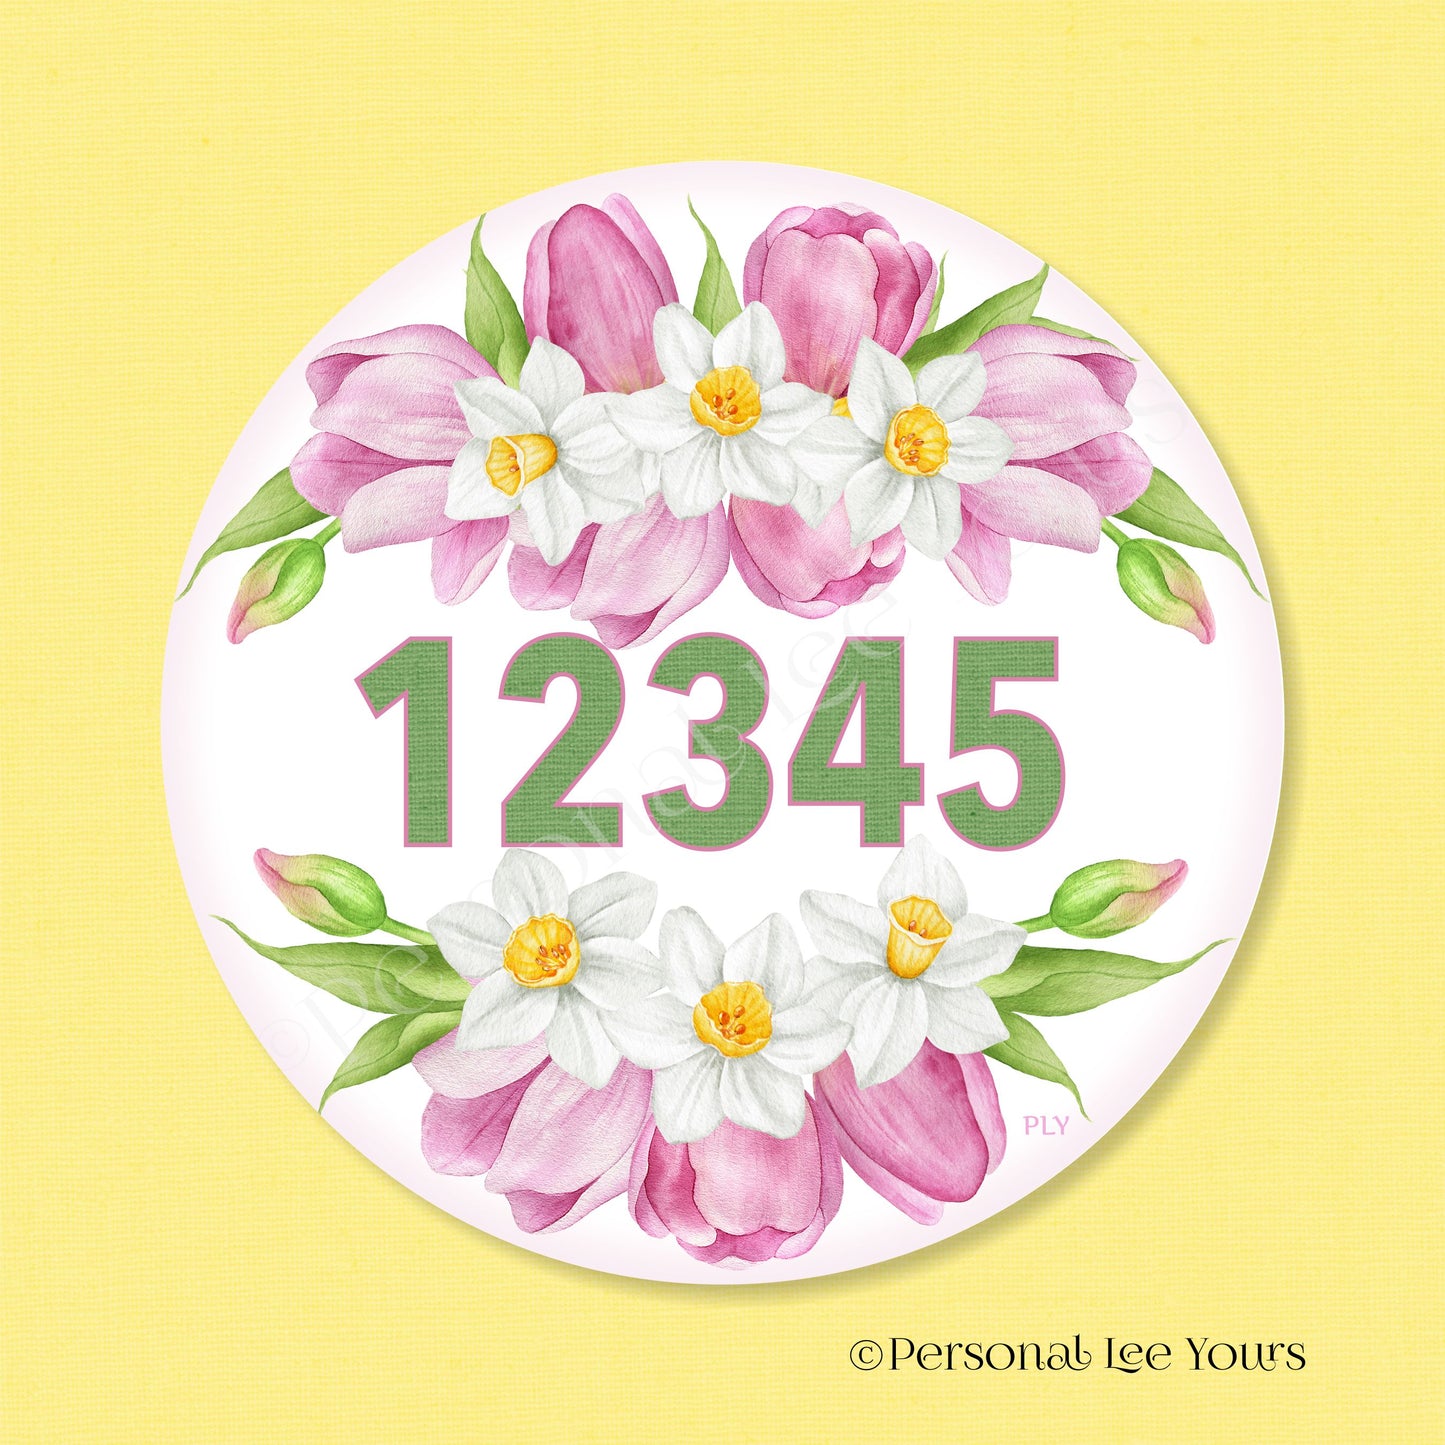 Personalized Wreath Sign * Pink Tulips And Daffodils * Your House Number * Round * Lightweight Metal